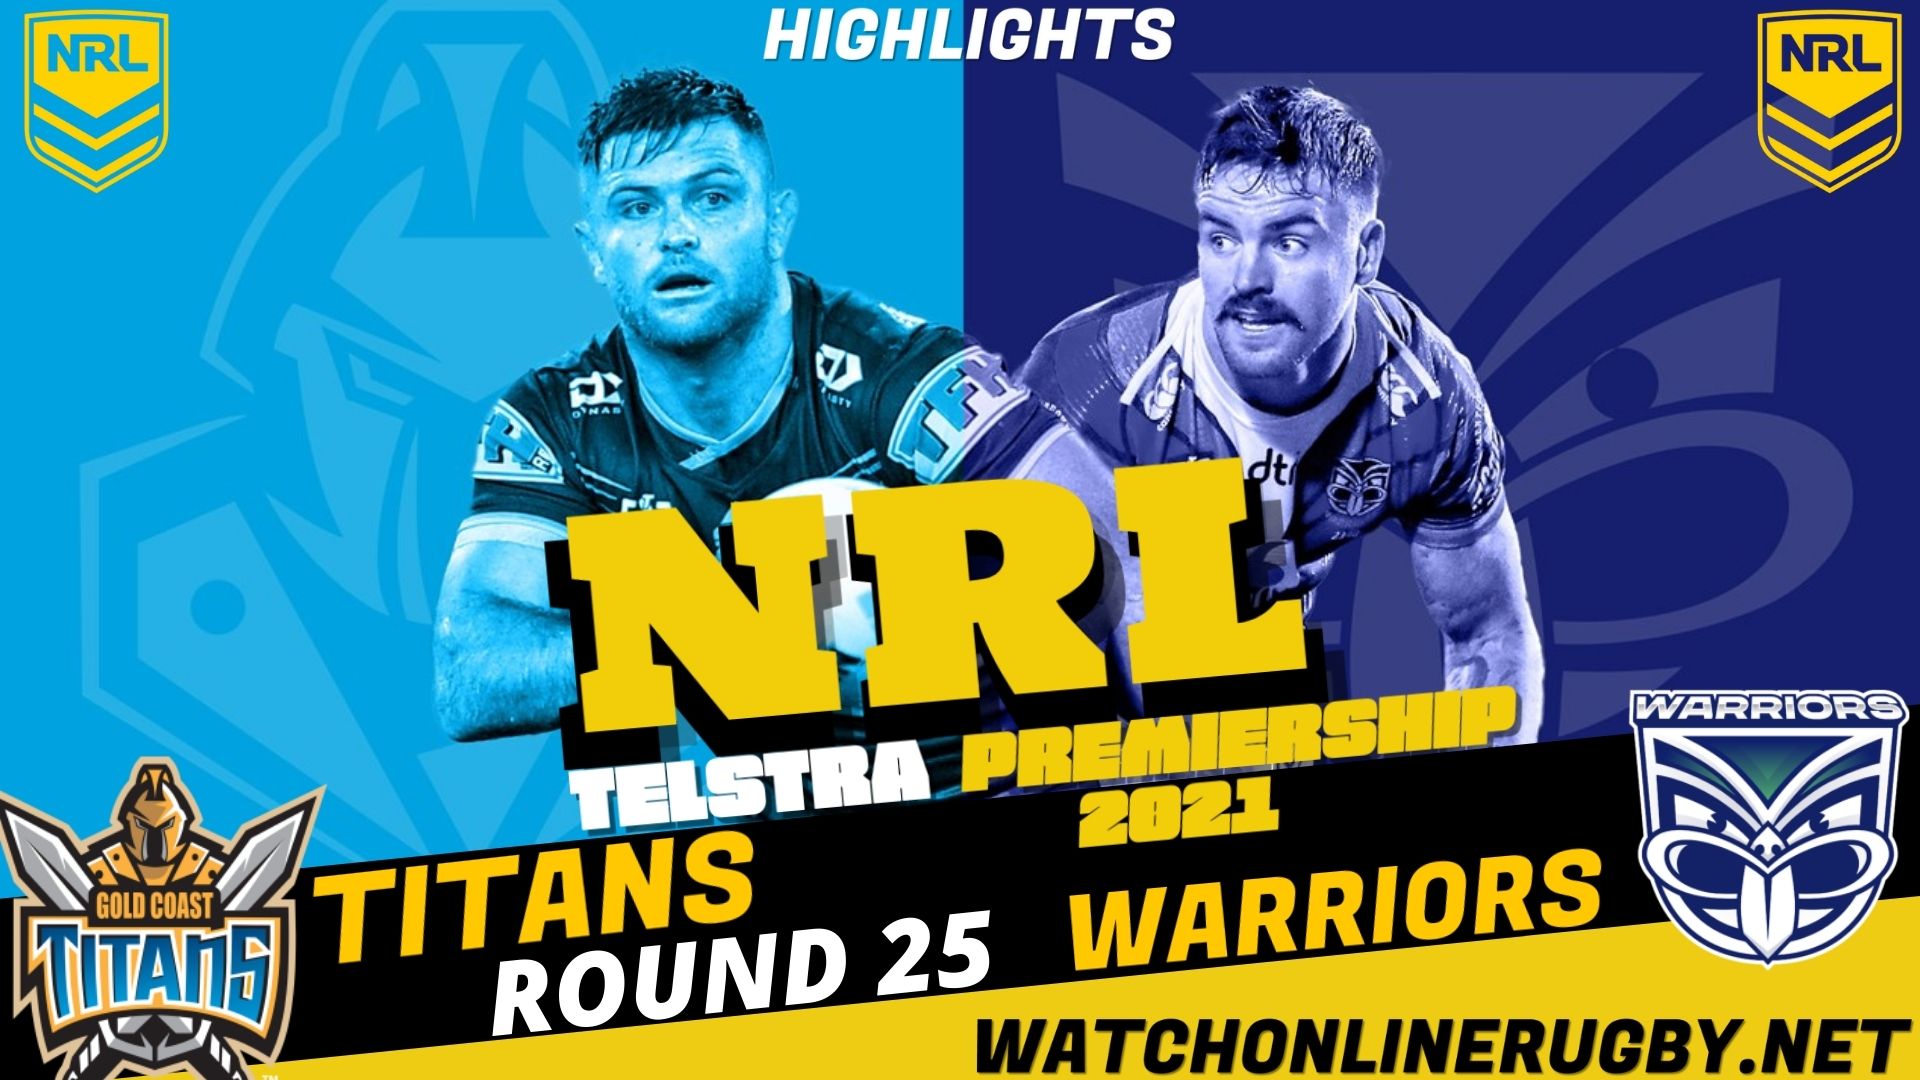 Titans Vs Warriors Highlights RD 25 NRL Rugby